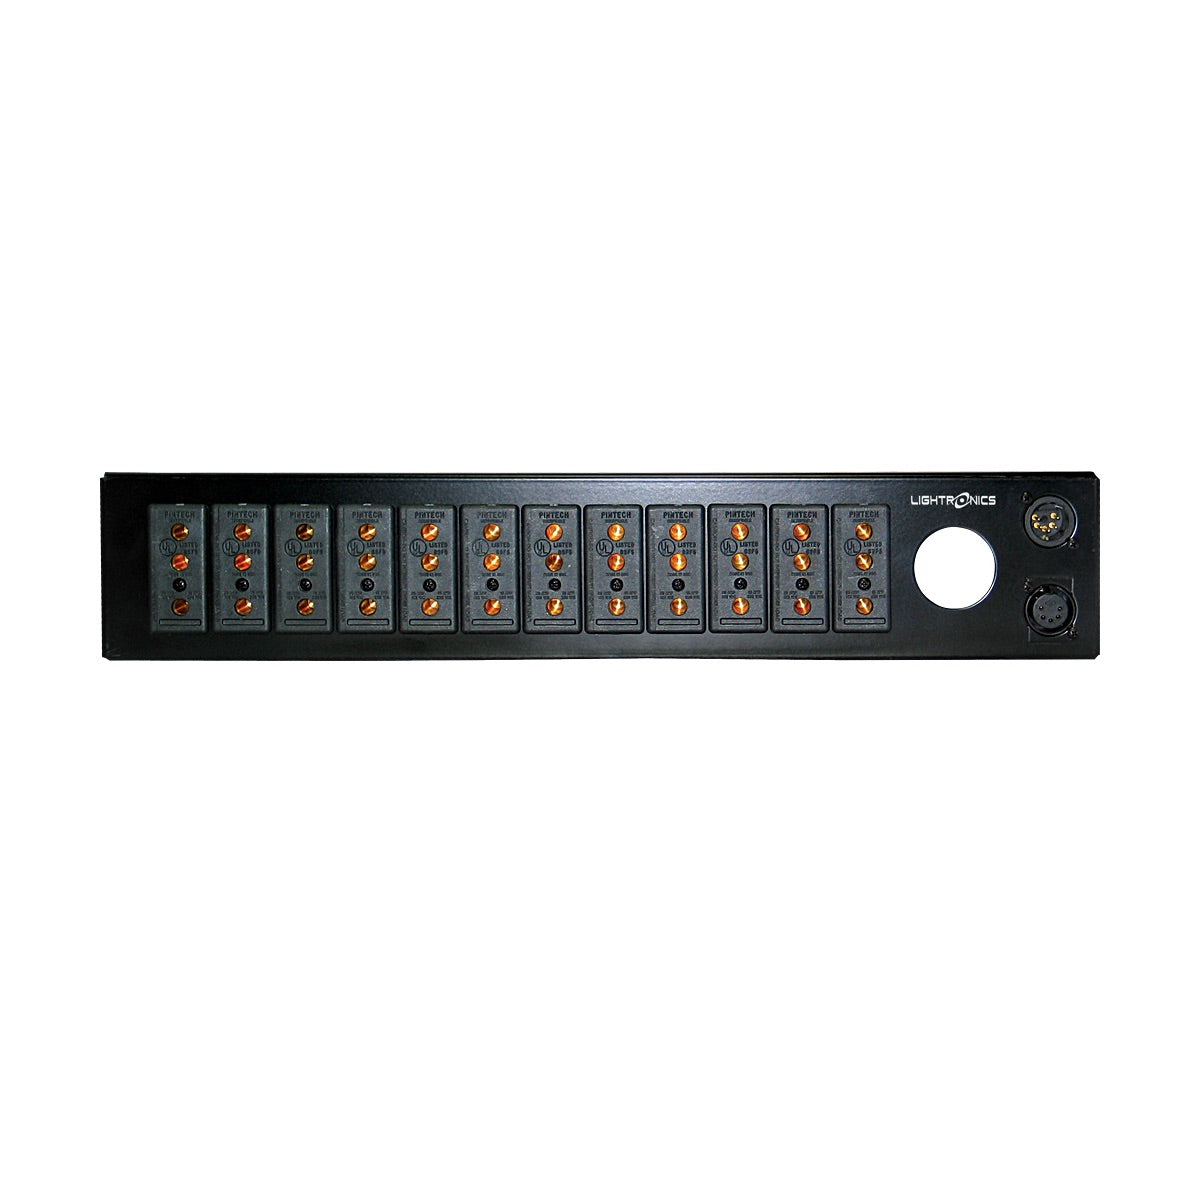 Lightronics RE82D Rack Mount Dimmer, RE Series, rear Stagepin Outlet Panel